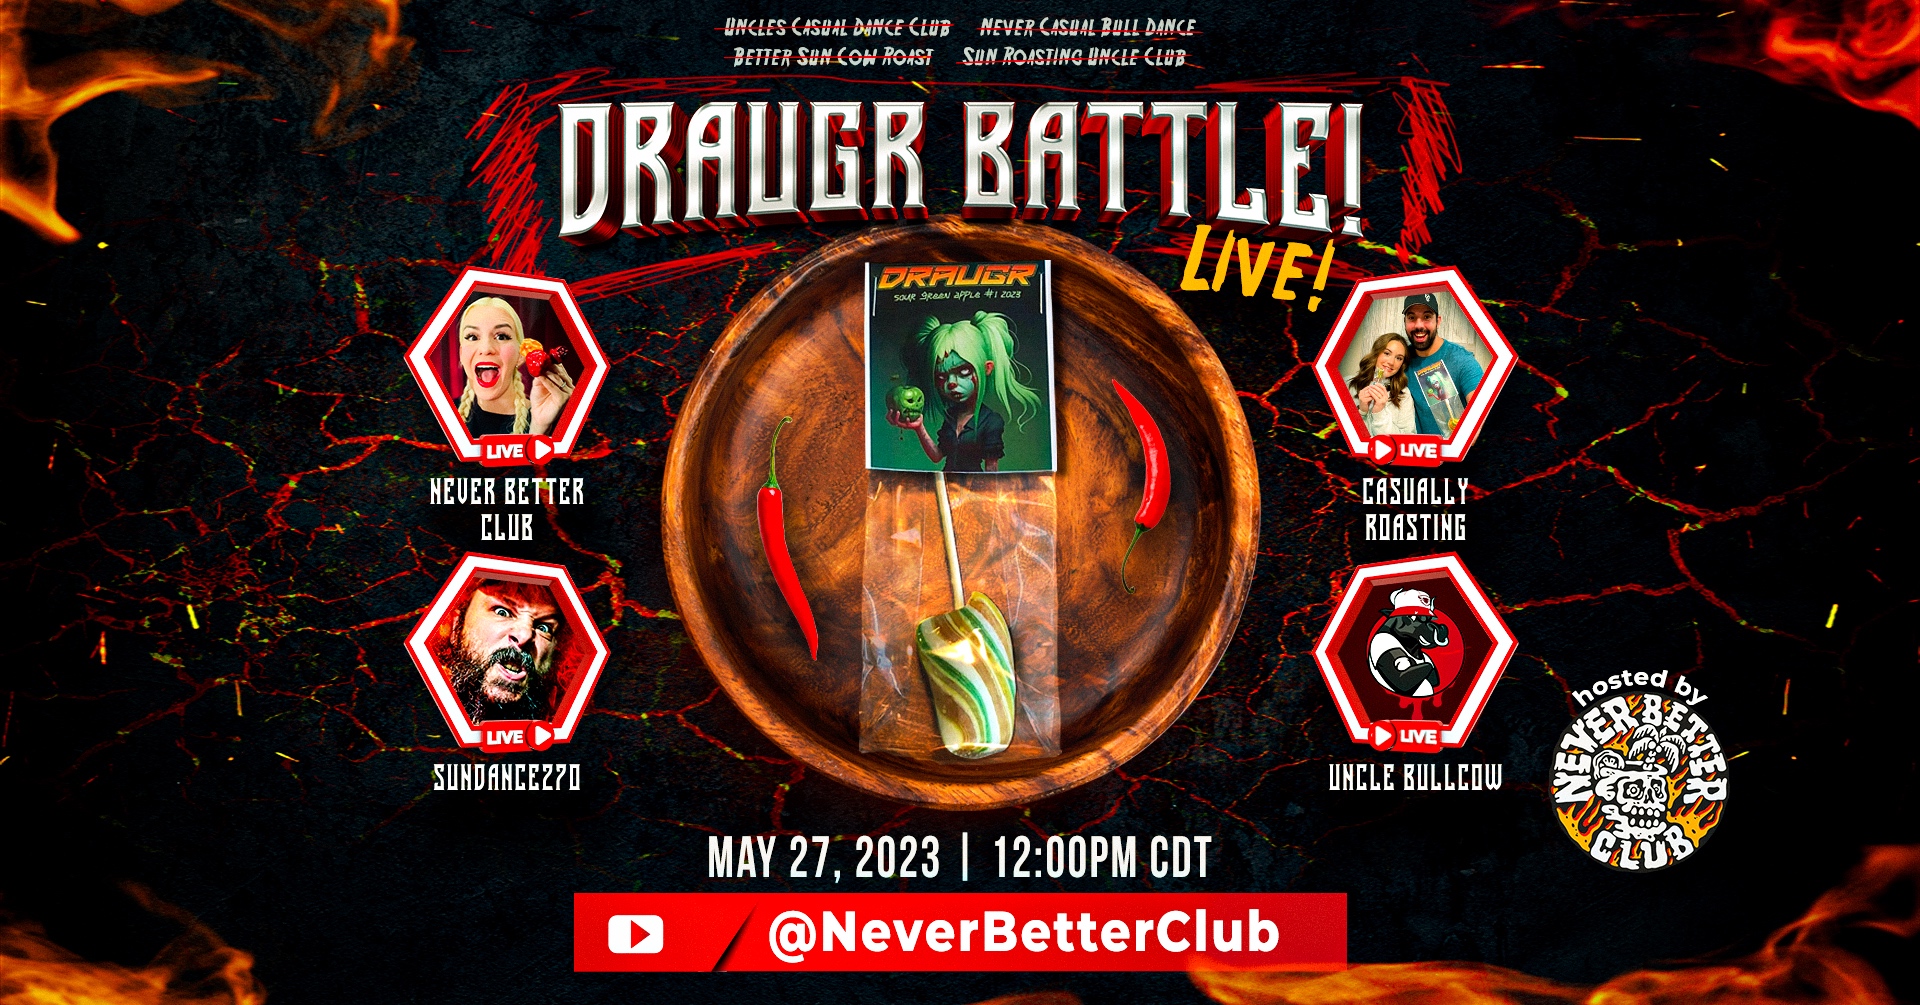 Draugr Battle! LIVE! Featuring Uncle BullCow, Casually Roasting, Sundance270, and Never Better Club